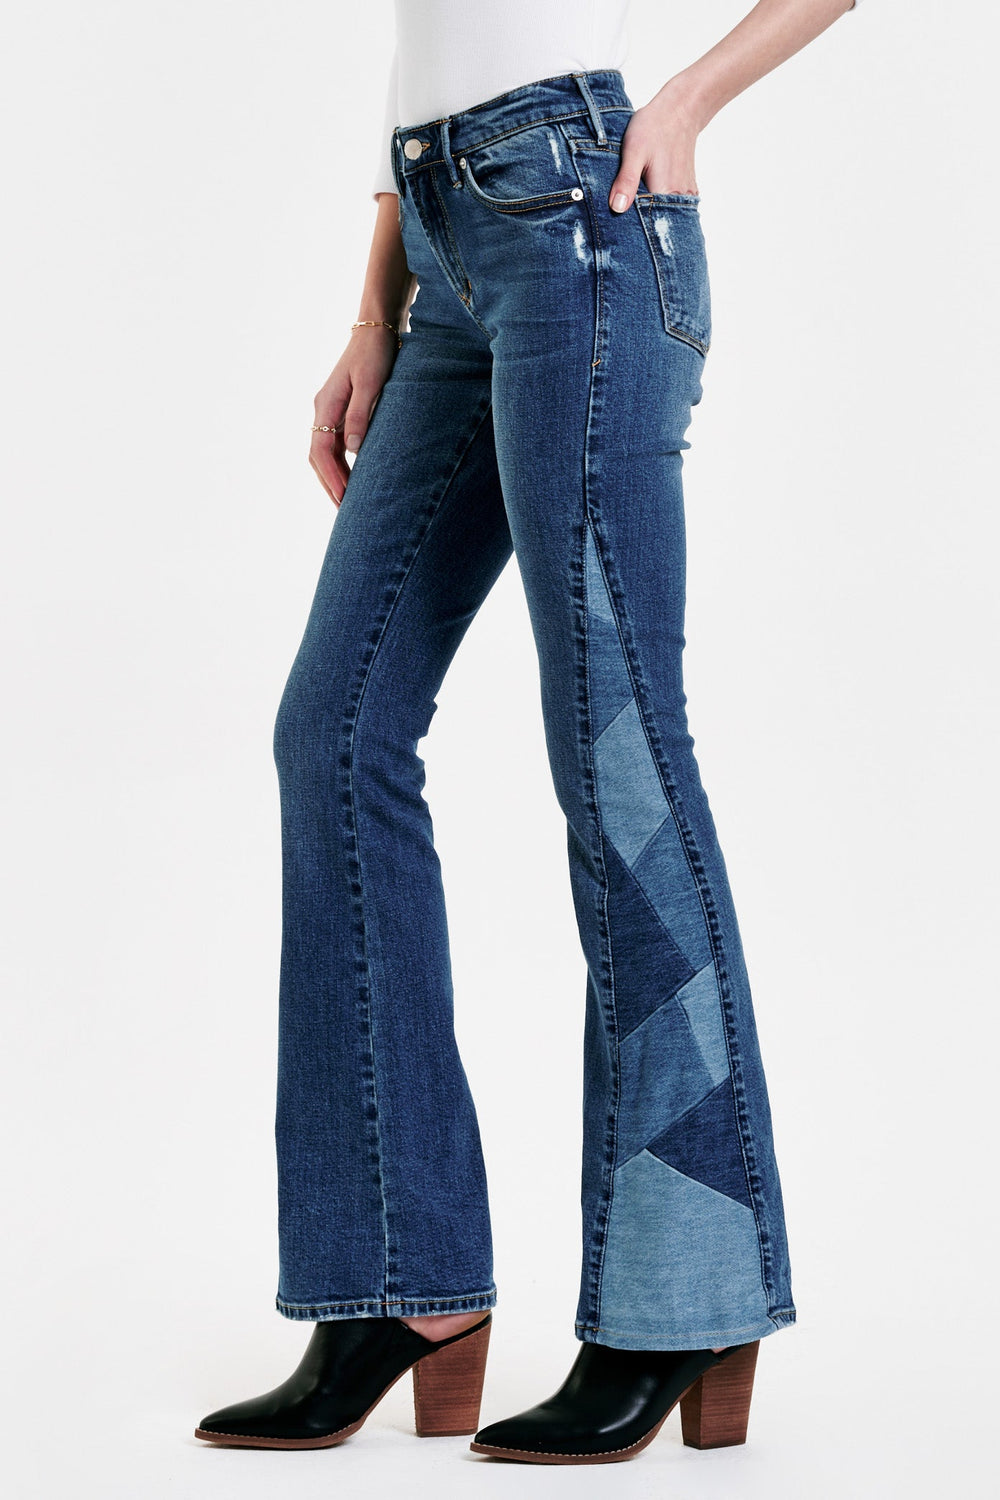 image of a female model wearing a ROSA HIGH RISE FLARE JEANS HIMALAYAN JEANS